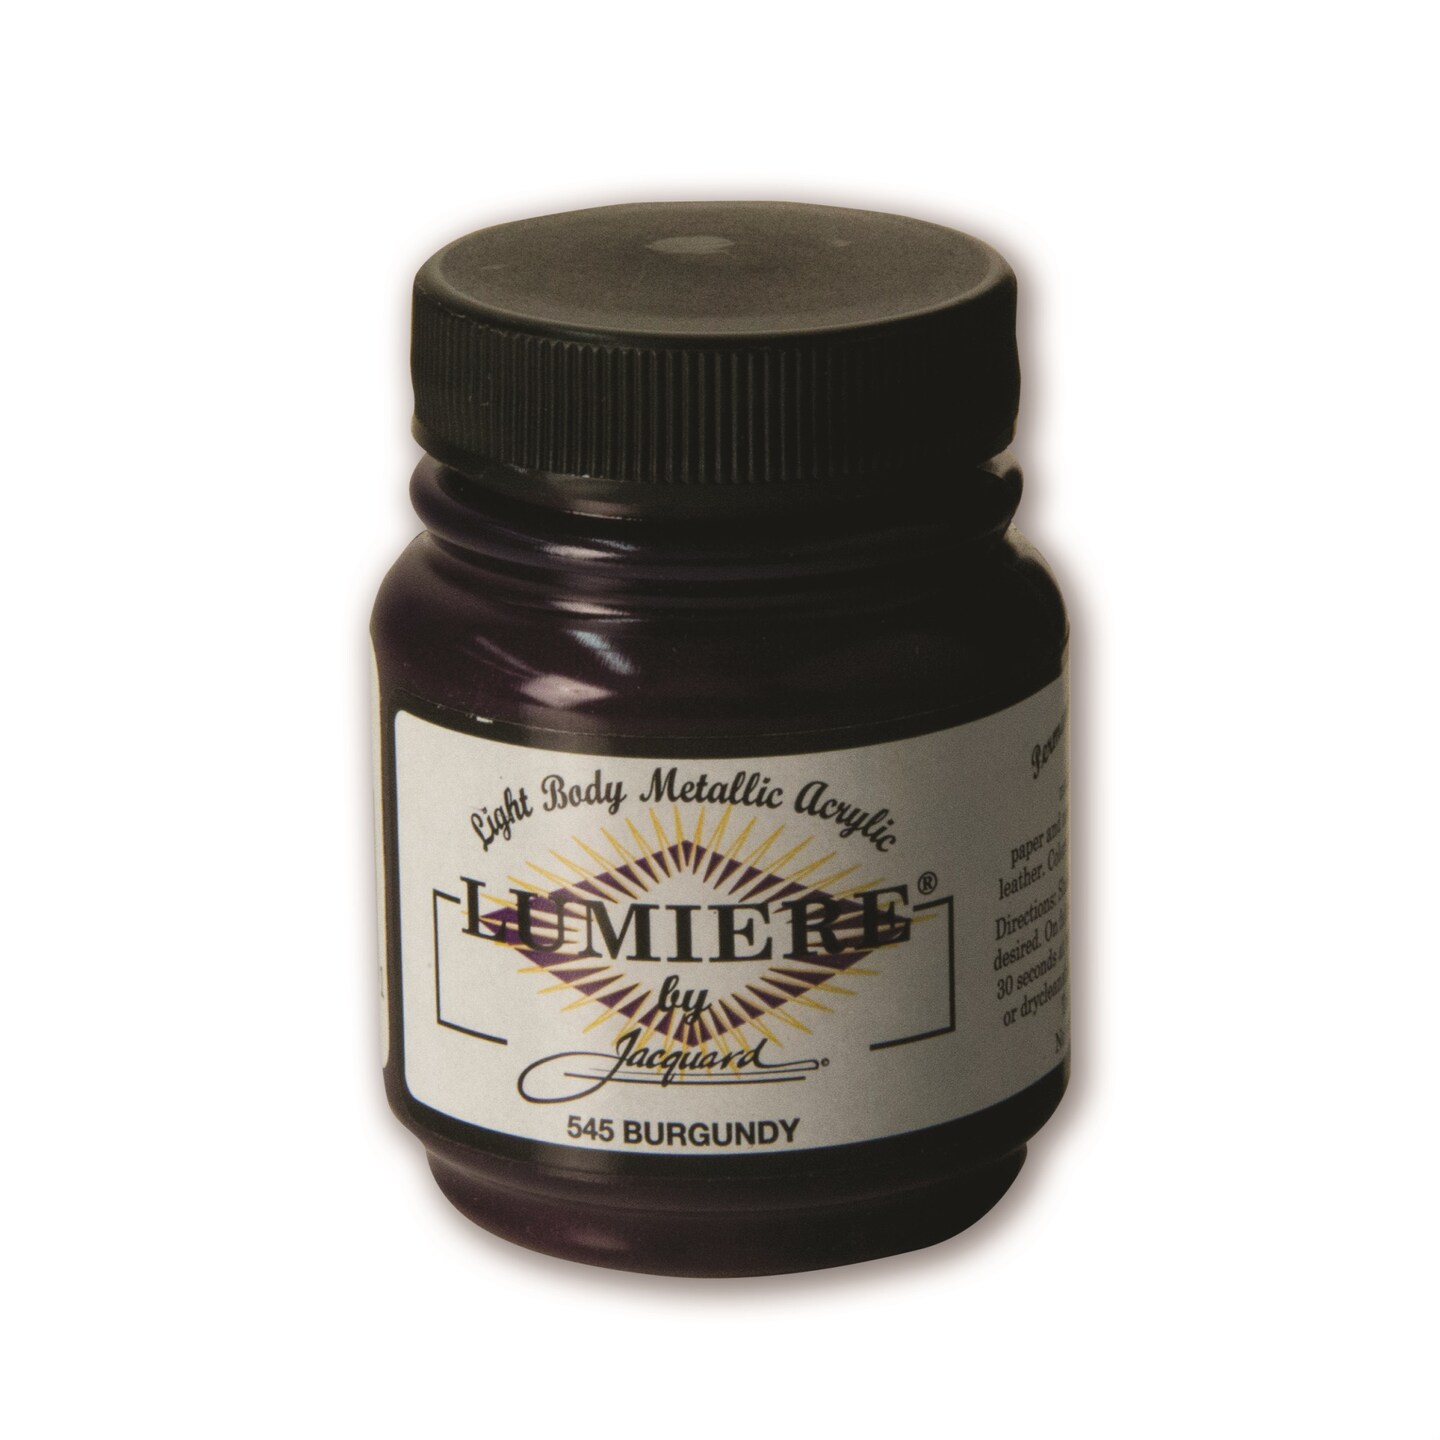 Jacquard Lumiere Metallic and Pearlescent Paint 2.25 Oz, 545 Burgundy ...